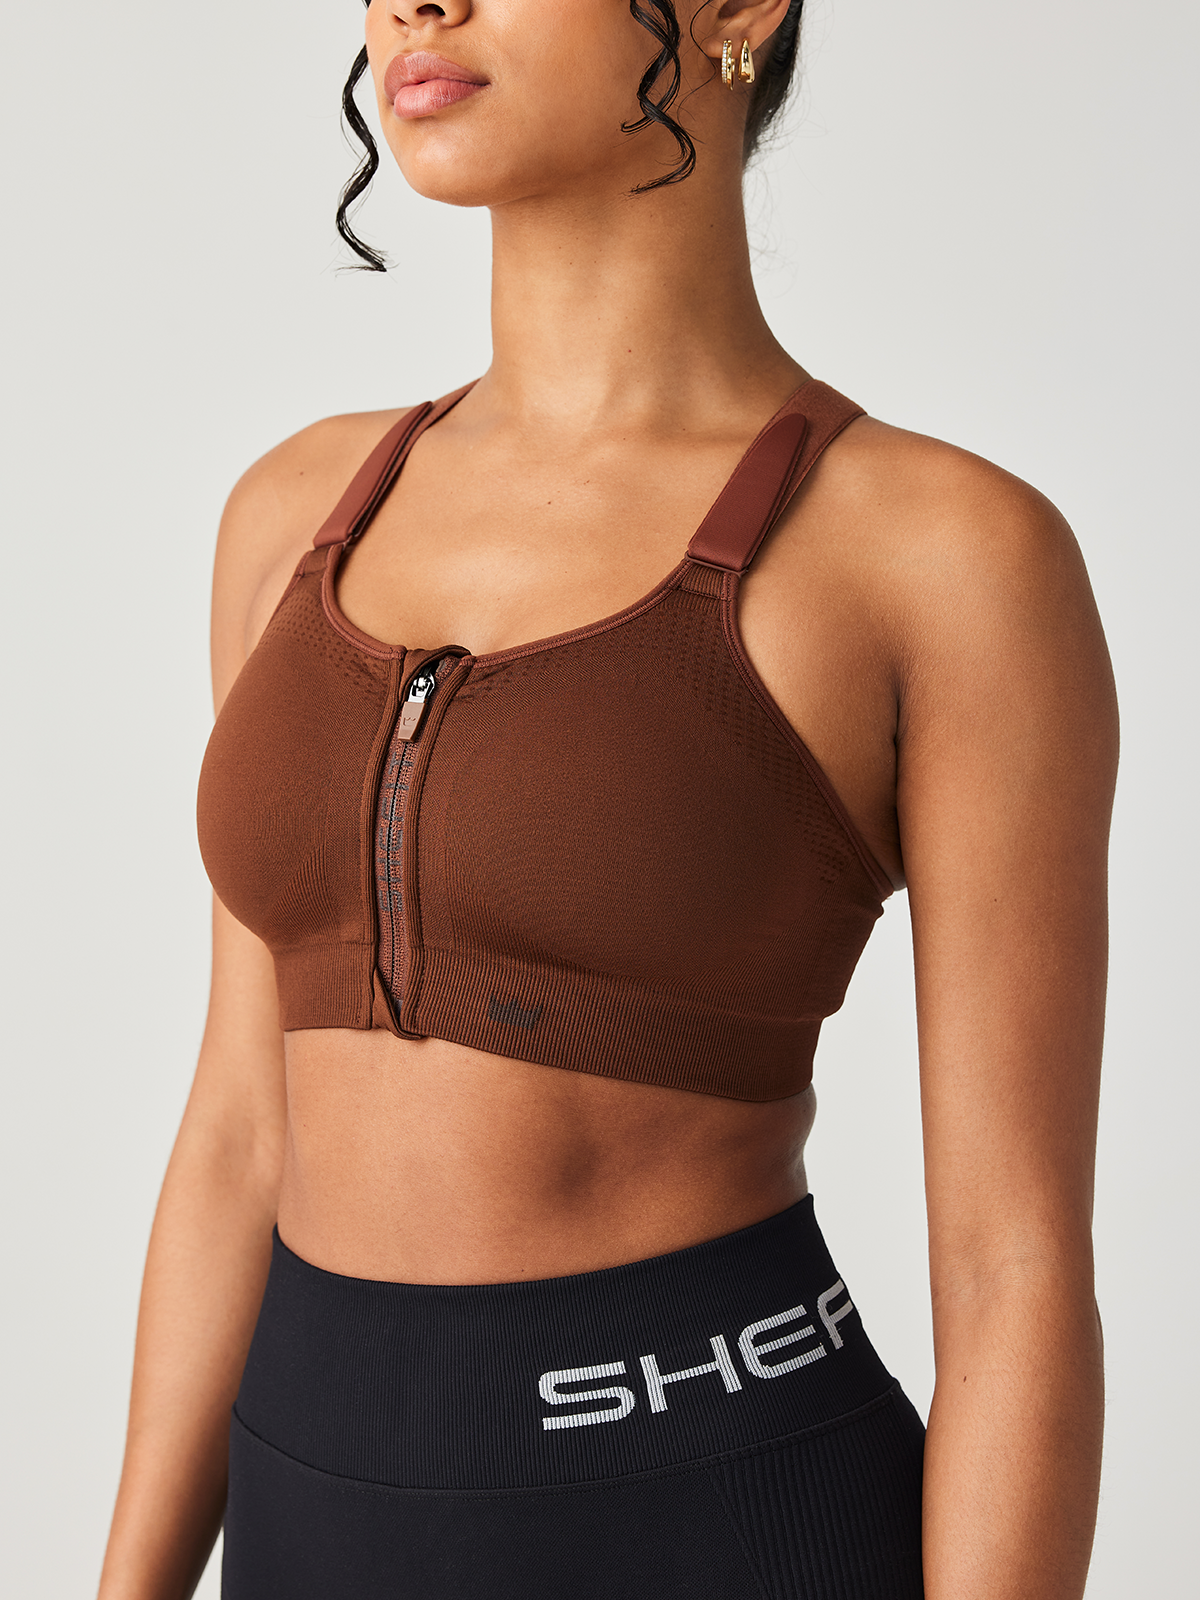 SHEFIT - Take a step forward with our NEW moveable, breathable